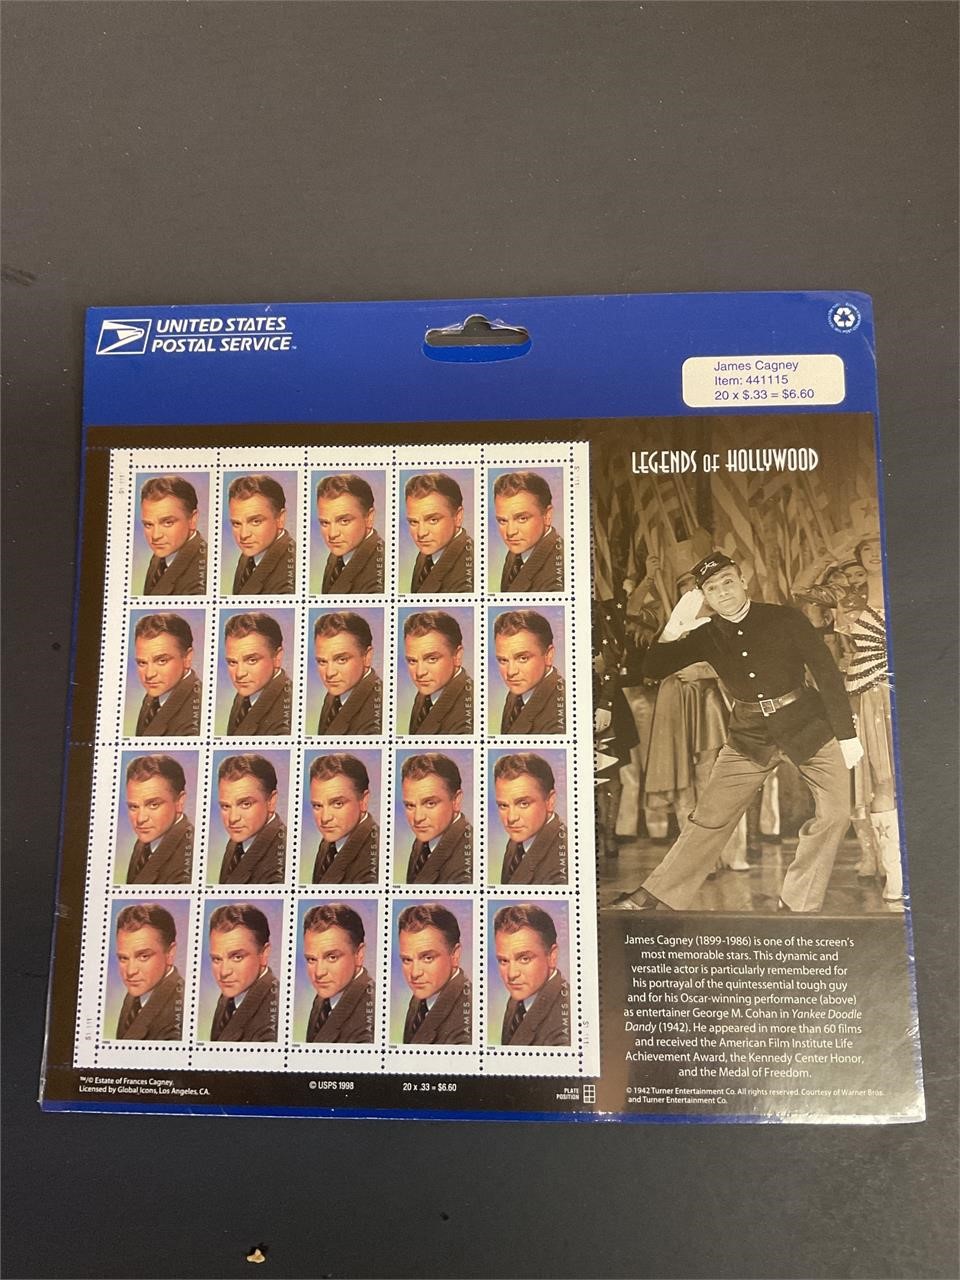 James Cagney stamps